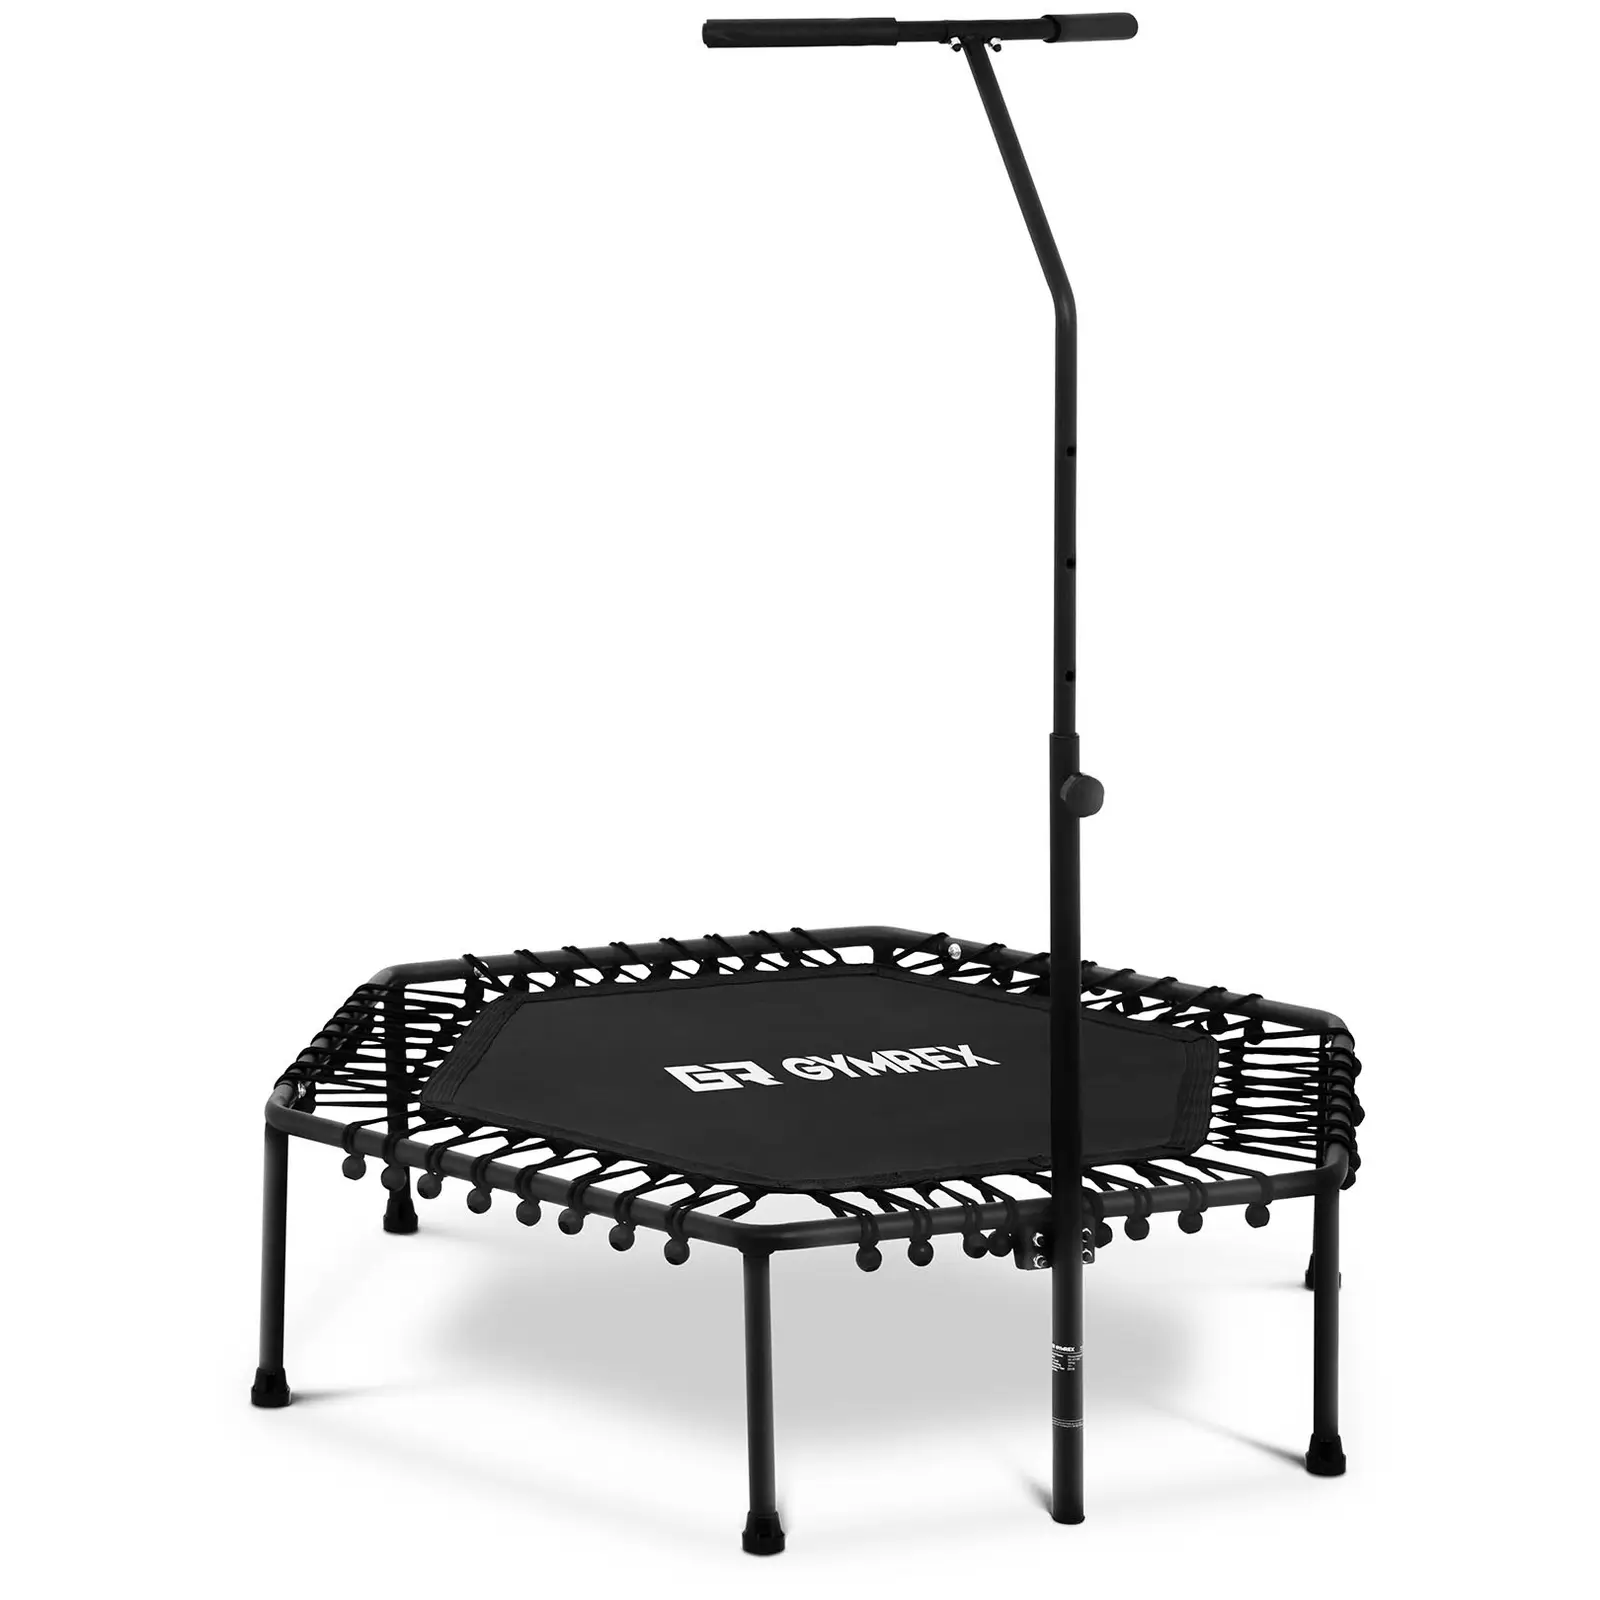 Factory second Fitness Trampoline - with handlebar - black